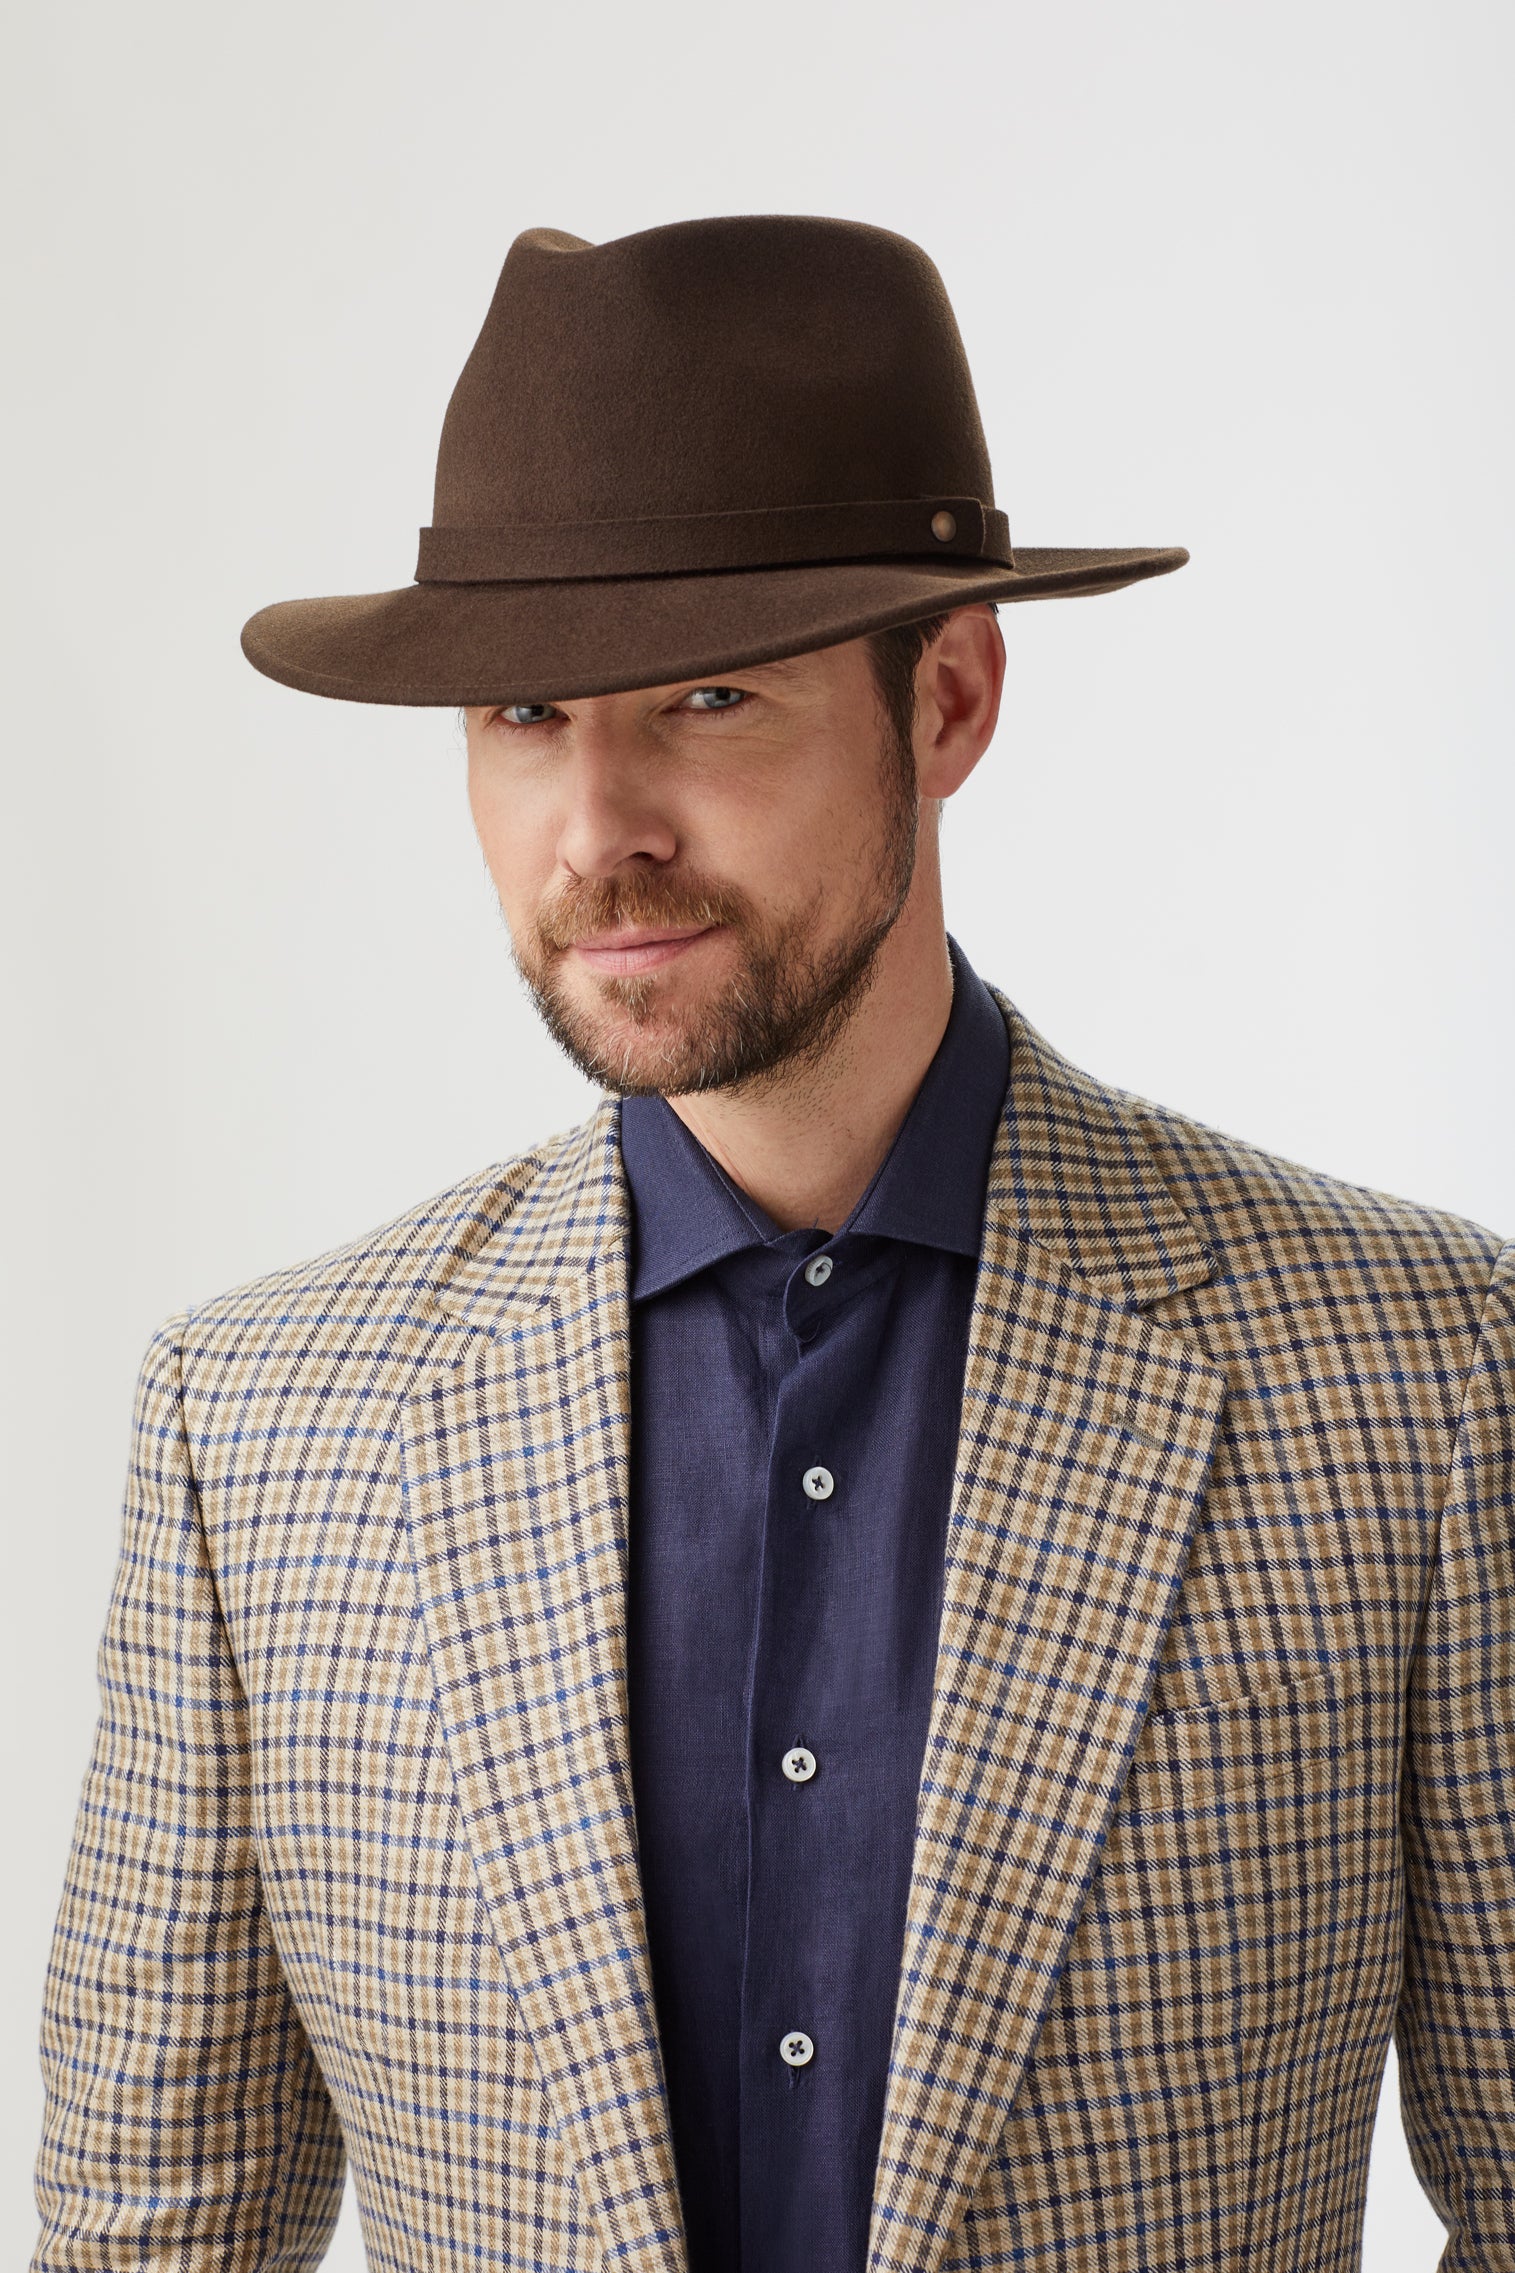 Nomad Rollable Trilby - Packable & Rollable Hats - Lock & Co. Hatters London UK